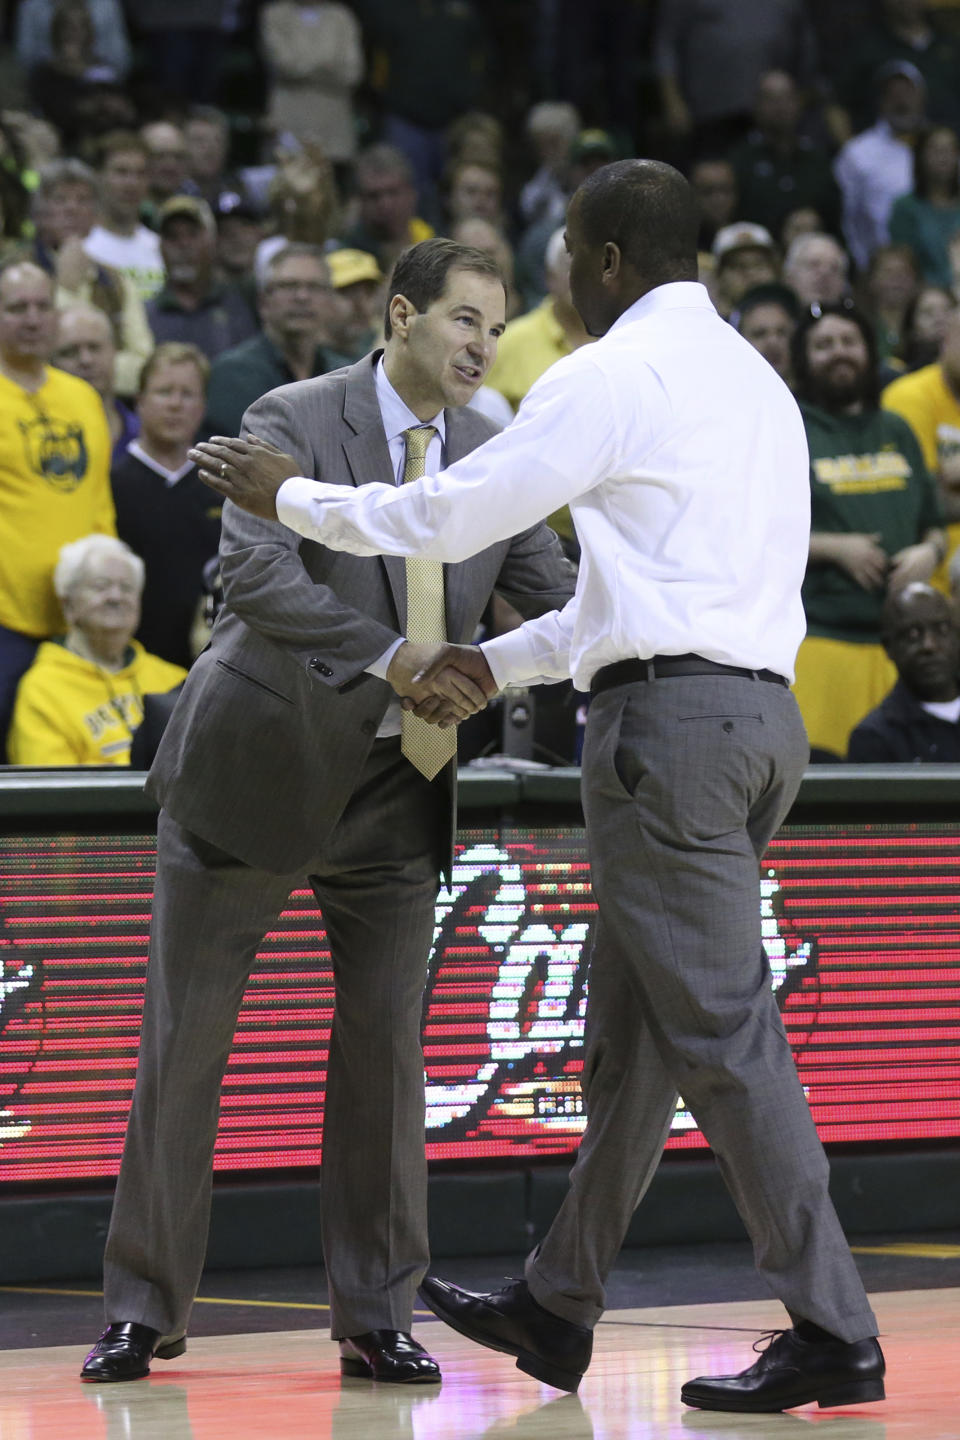 Baylor coach Scott Drew, left, shakes hands with Oklahoma State coach Mike Boynton, right, after Boynton was ejected during the second half of an NCAA college basketball game Saturday, Feb. 8, 2020, in Waco, Texas. (AP Photo/Rod Aydelotte)